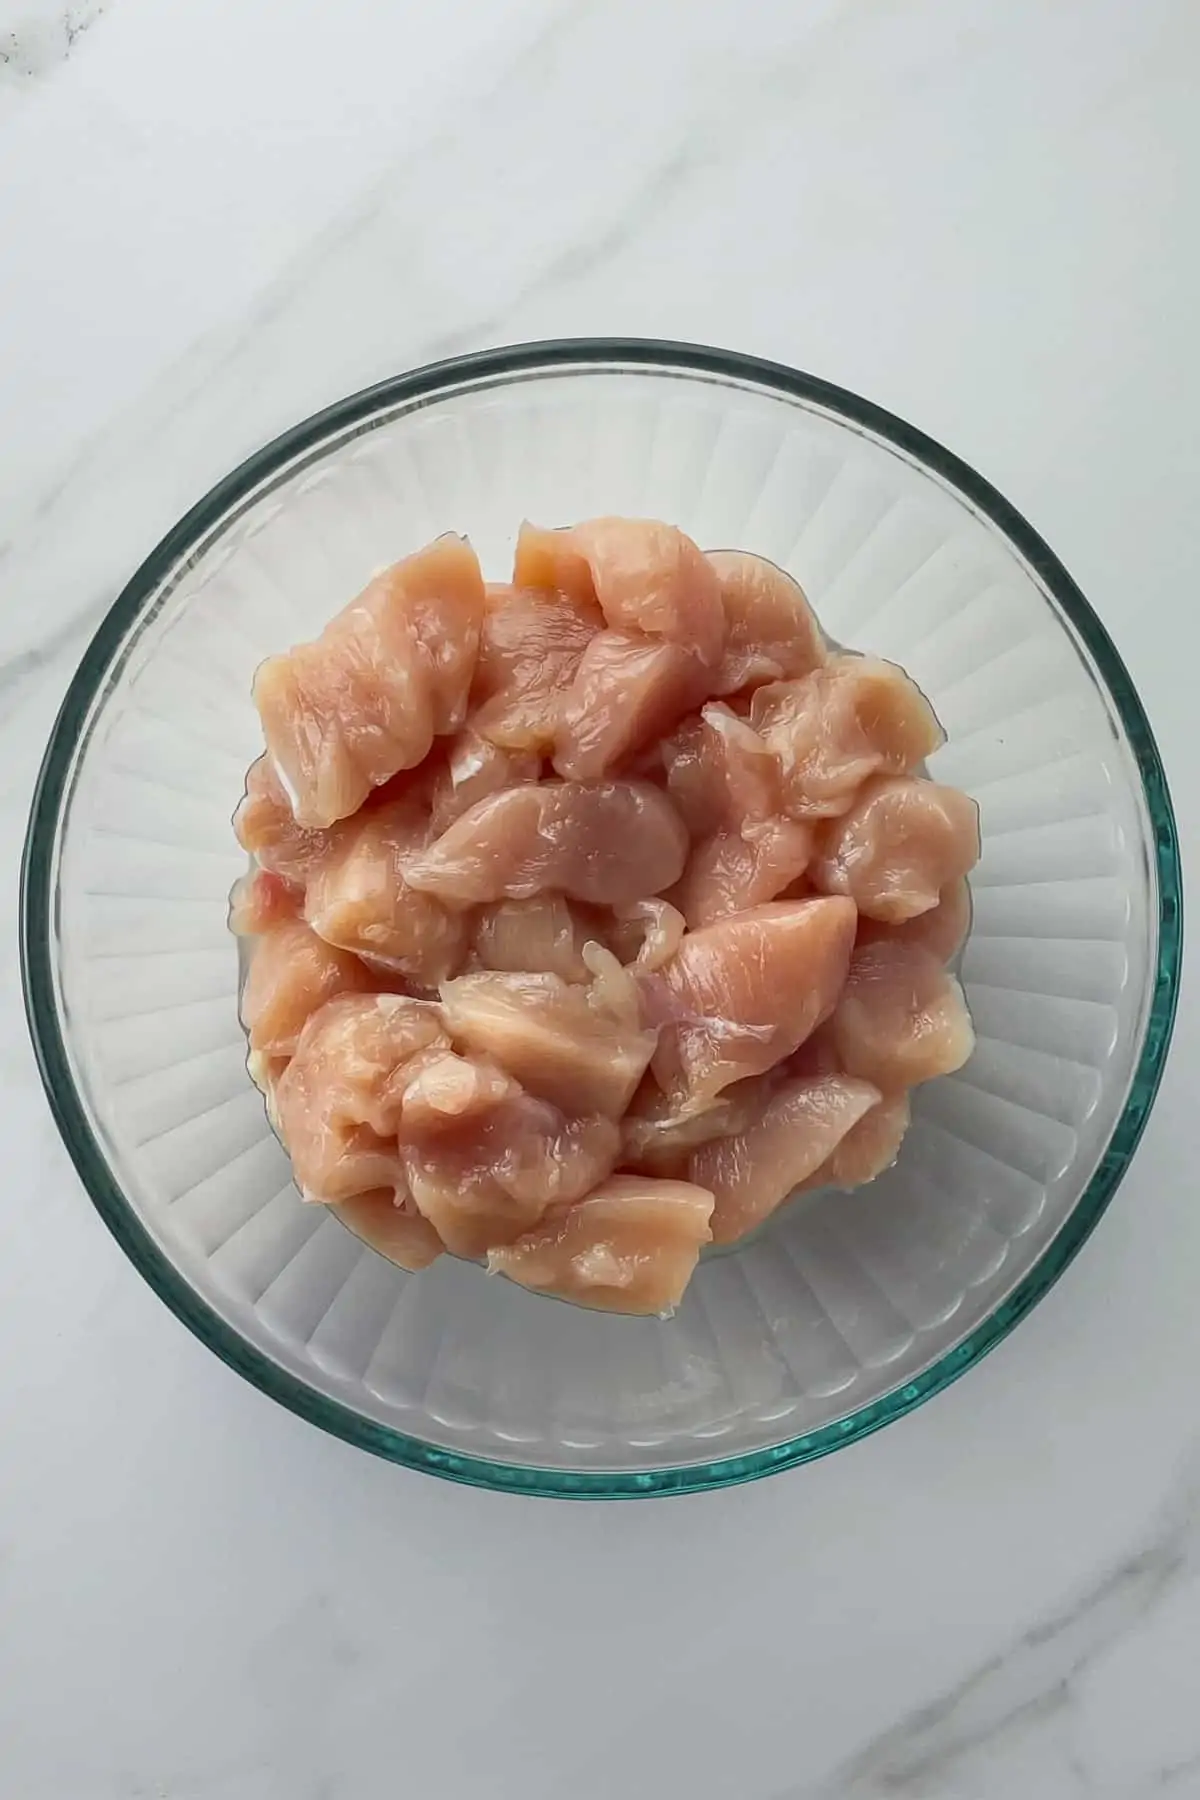 raw chicken pieces in a glass mixing bowl